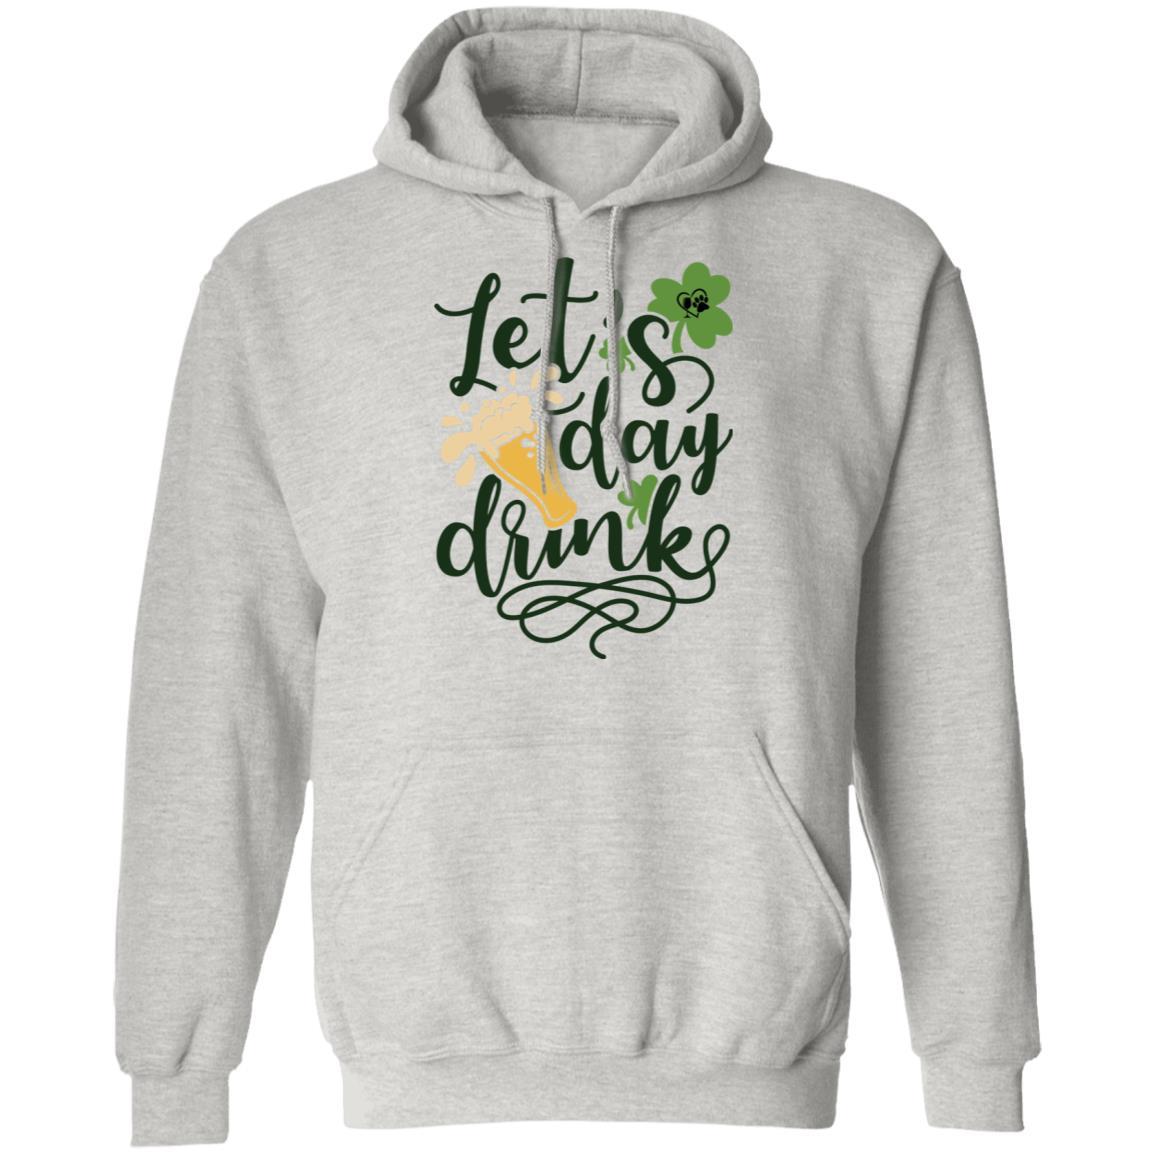 Sweatshirts Ash / S Winey Bitches Co  "Let's Day Drink" Pullover Hoodie 8 oz. WineyBitchesCo